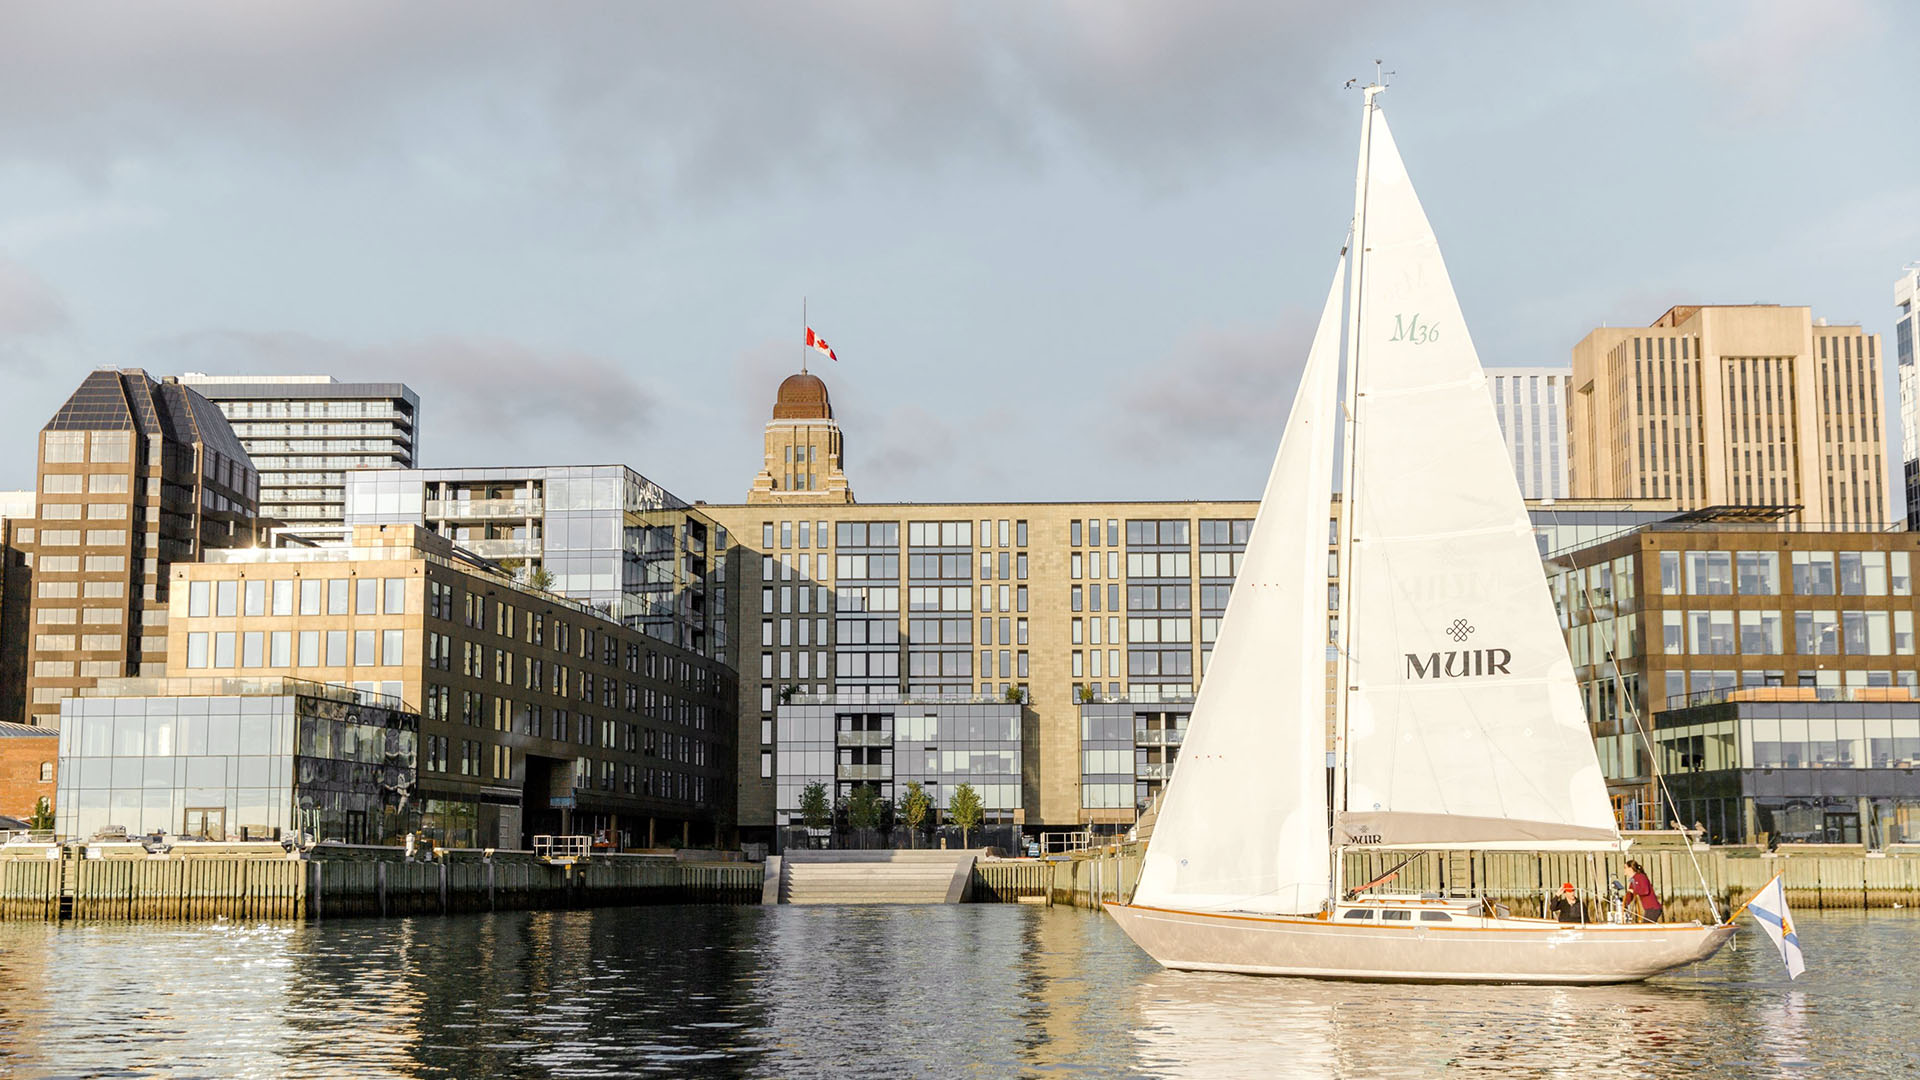 Muir, Autograph Collection hotel and a sailboat on the Halifax waterfront